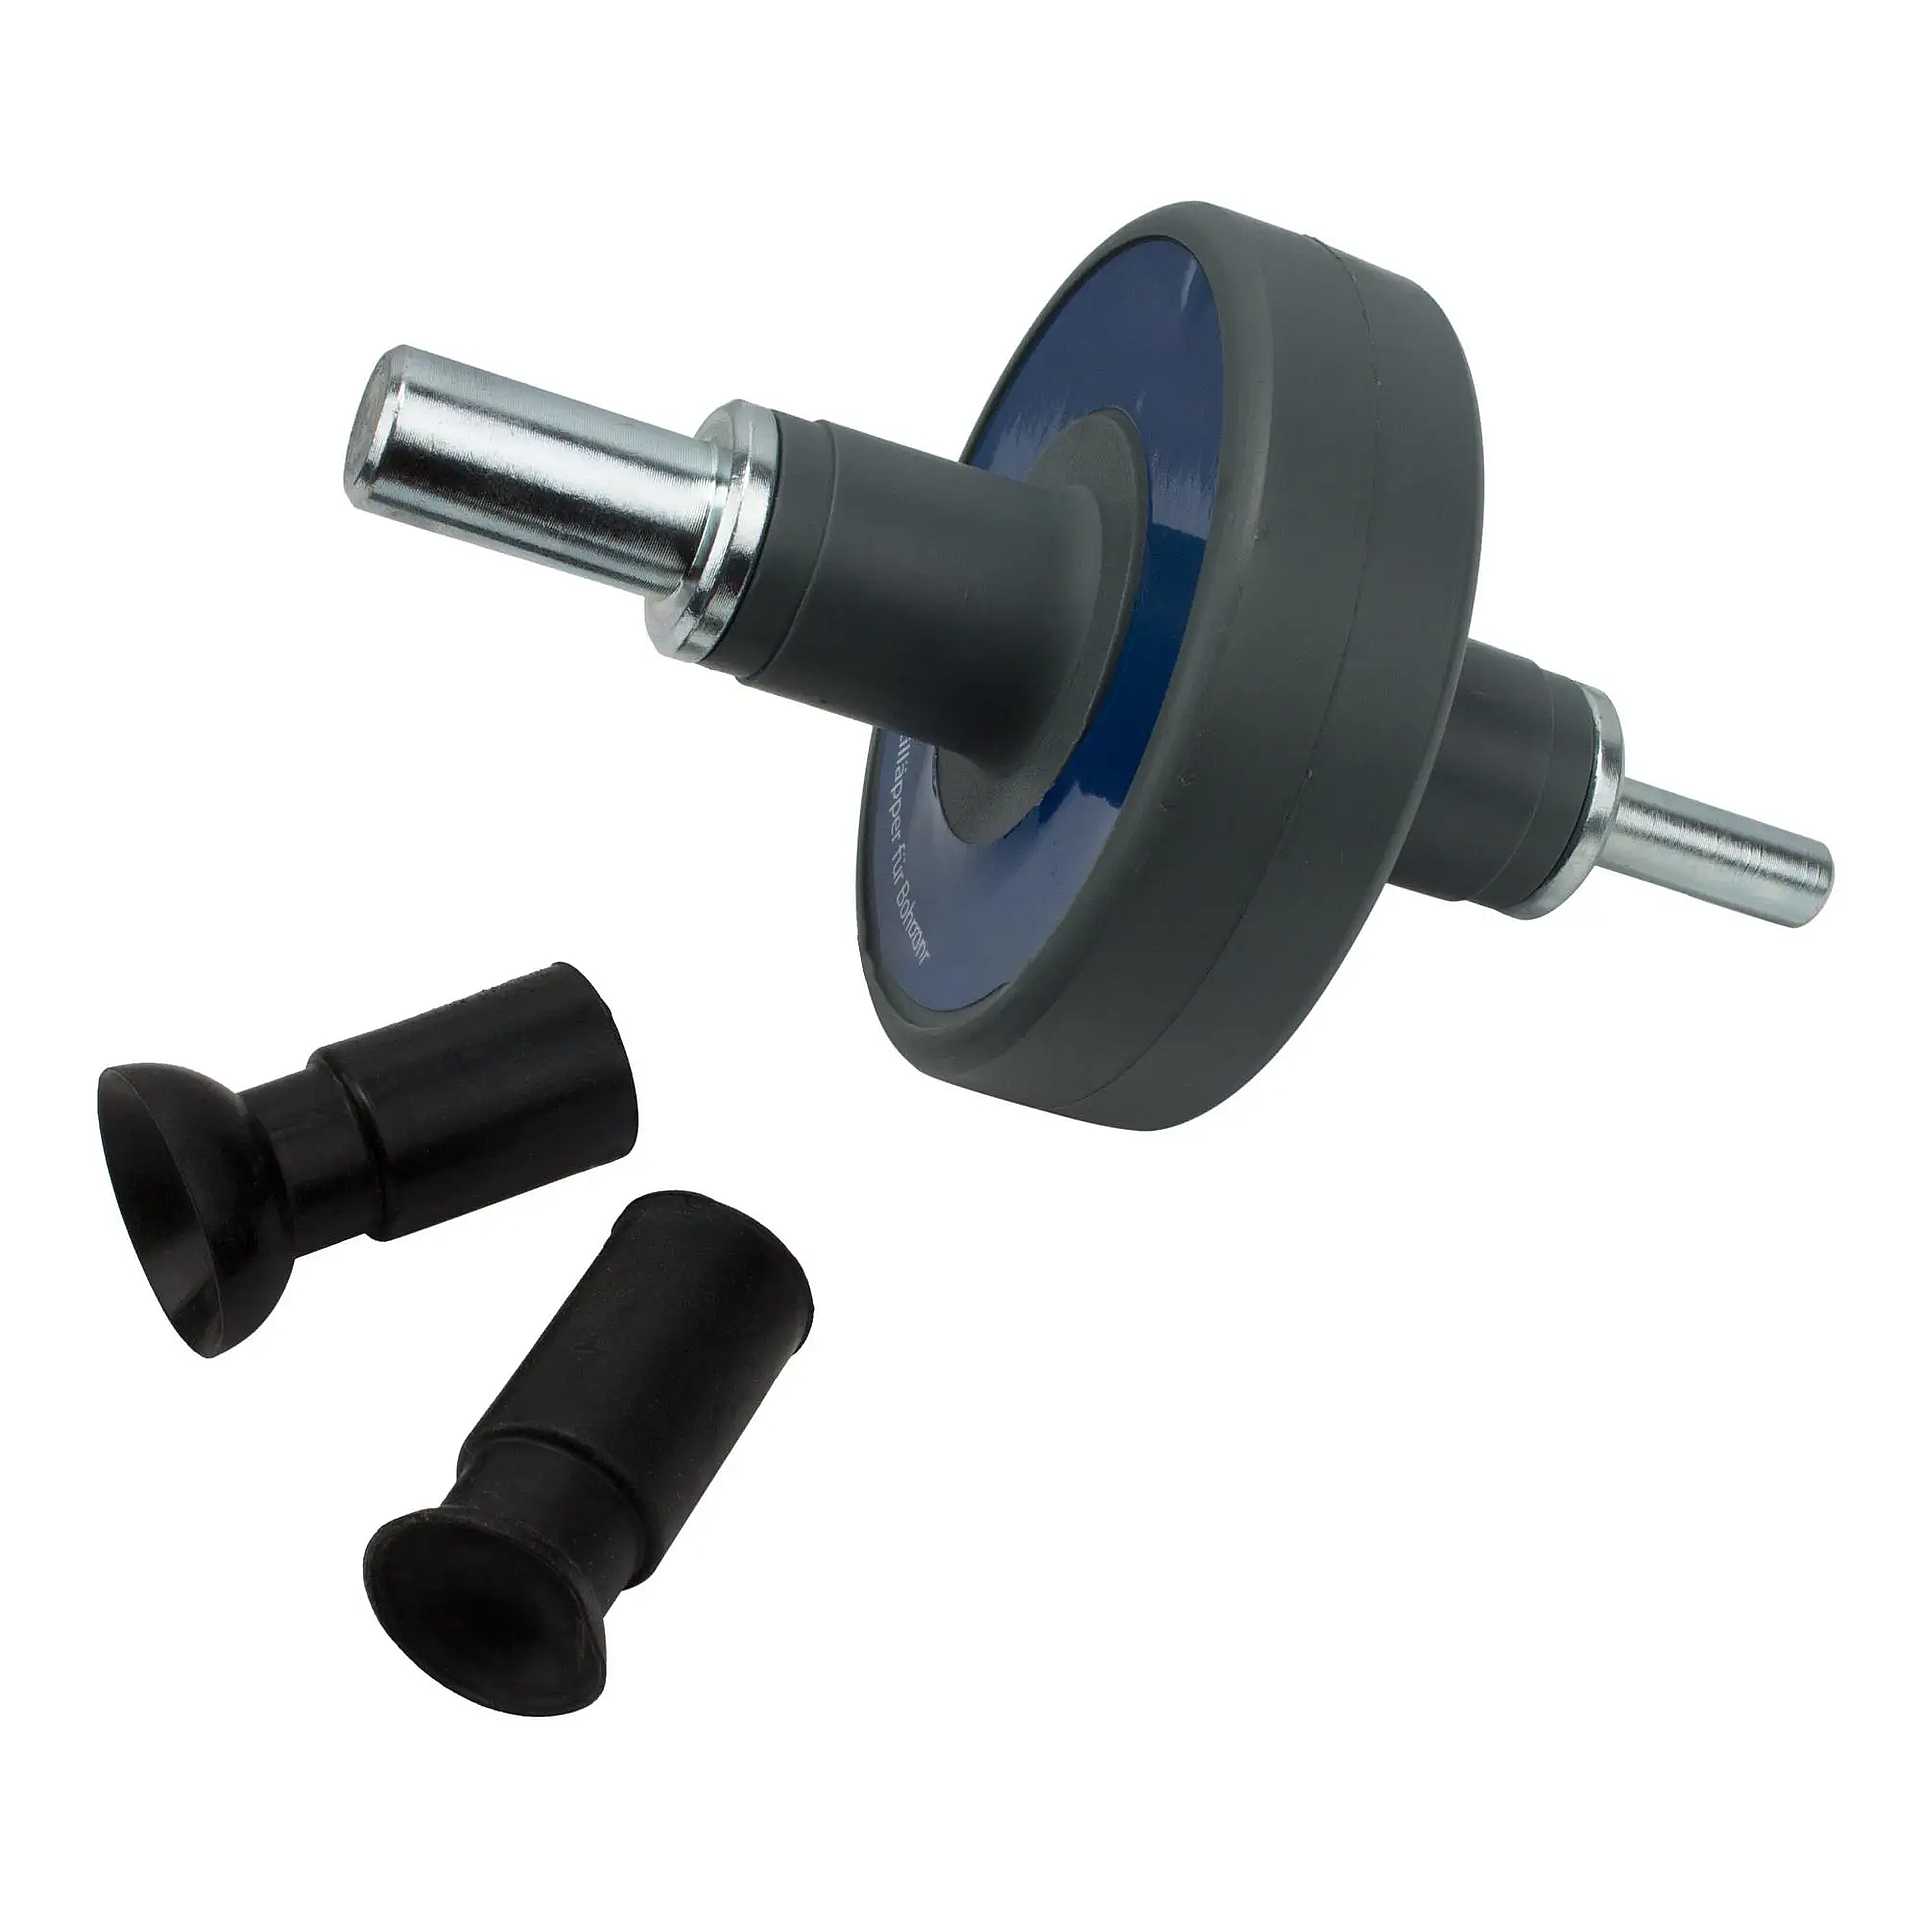 3-piece valve sander for the drill